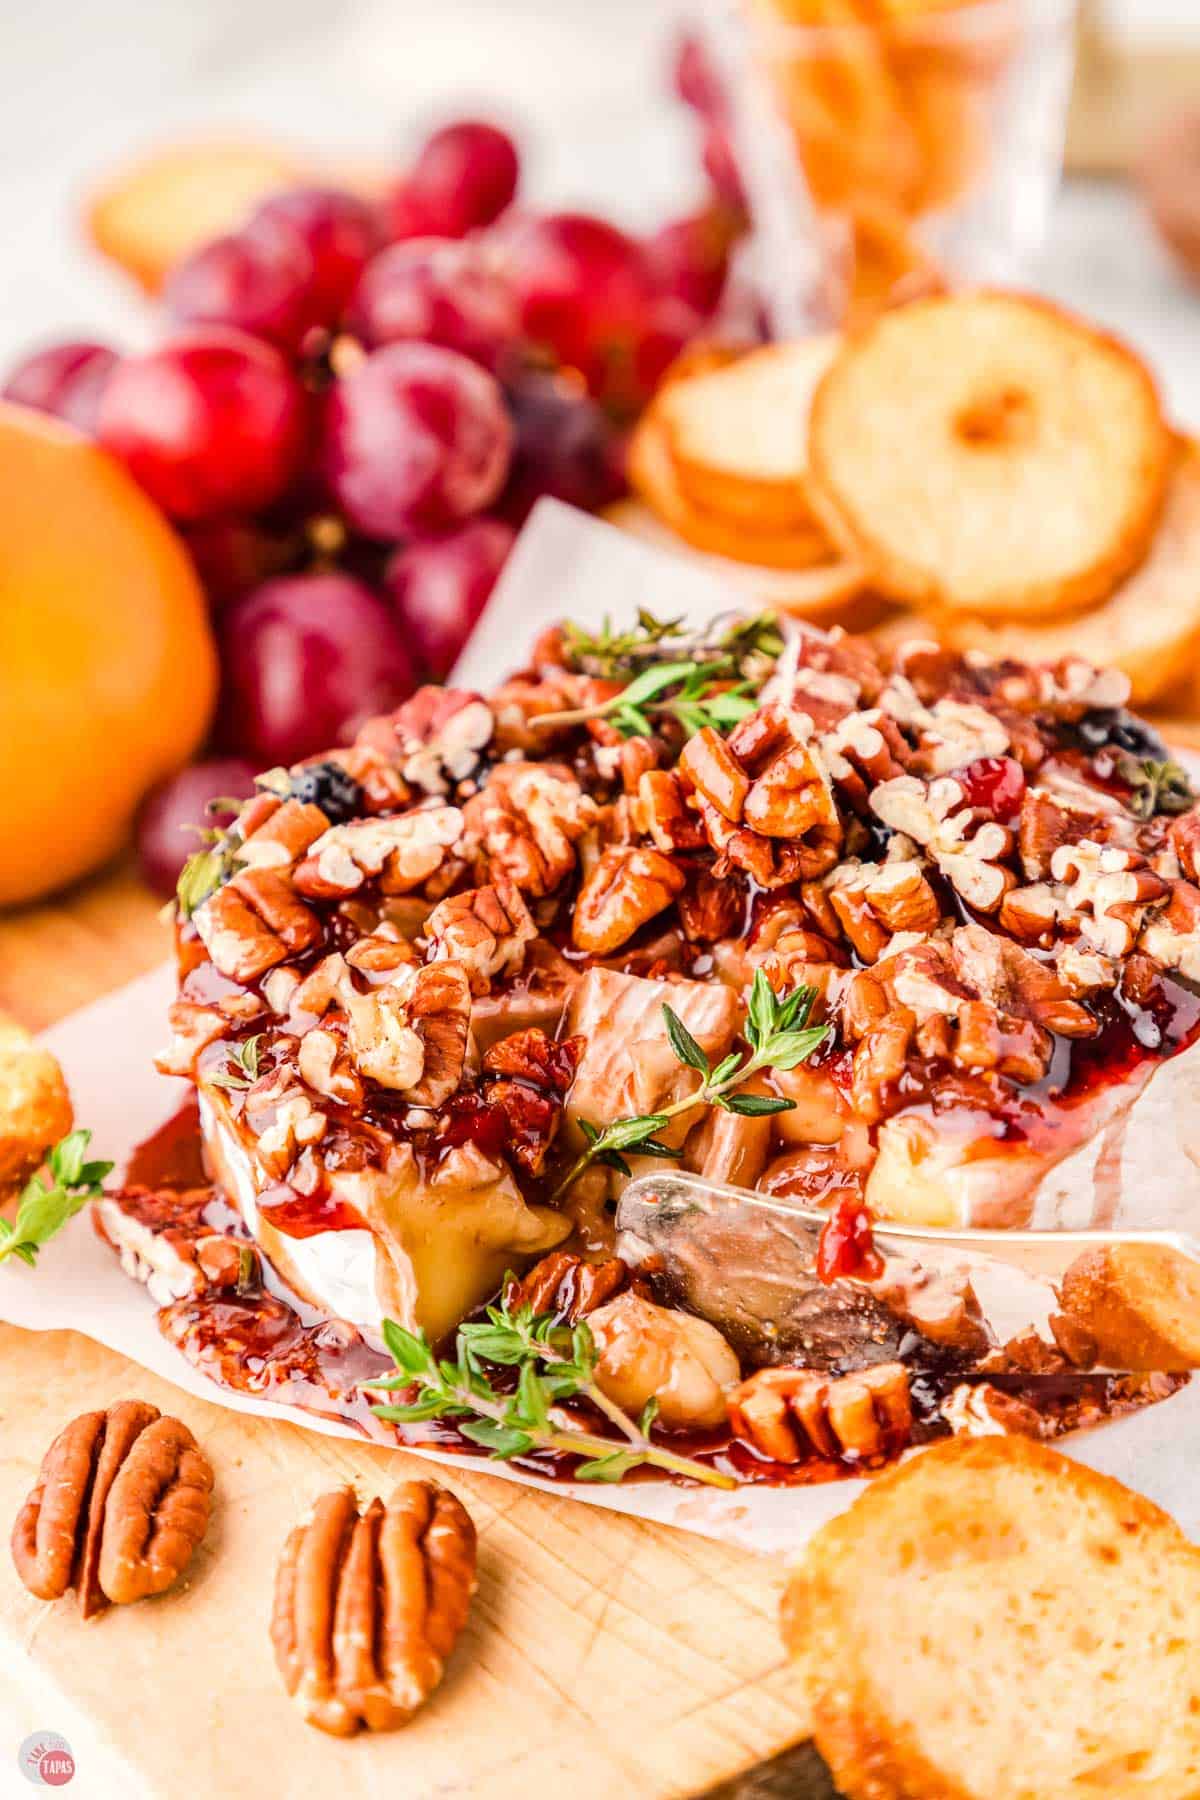 knife cutting into a wheel of brie topped with jam and nuts